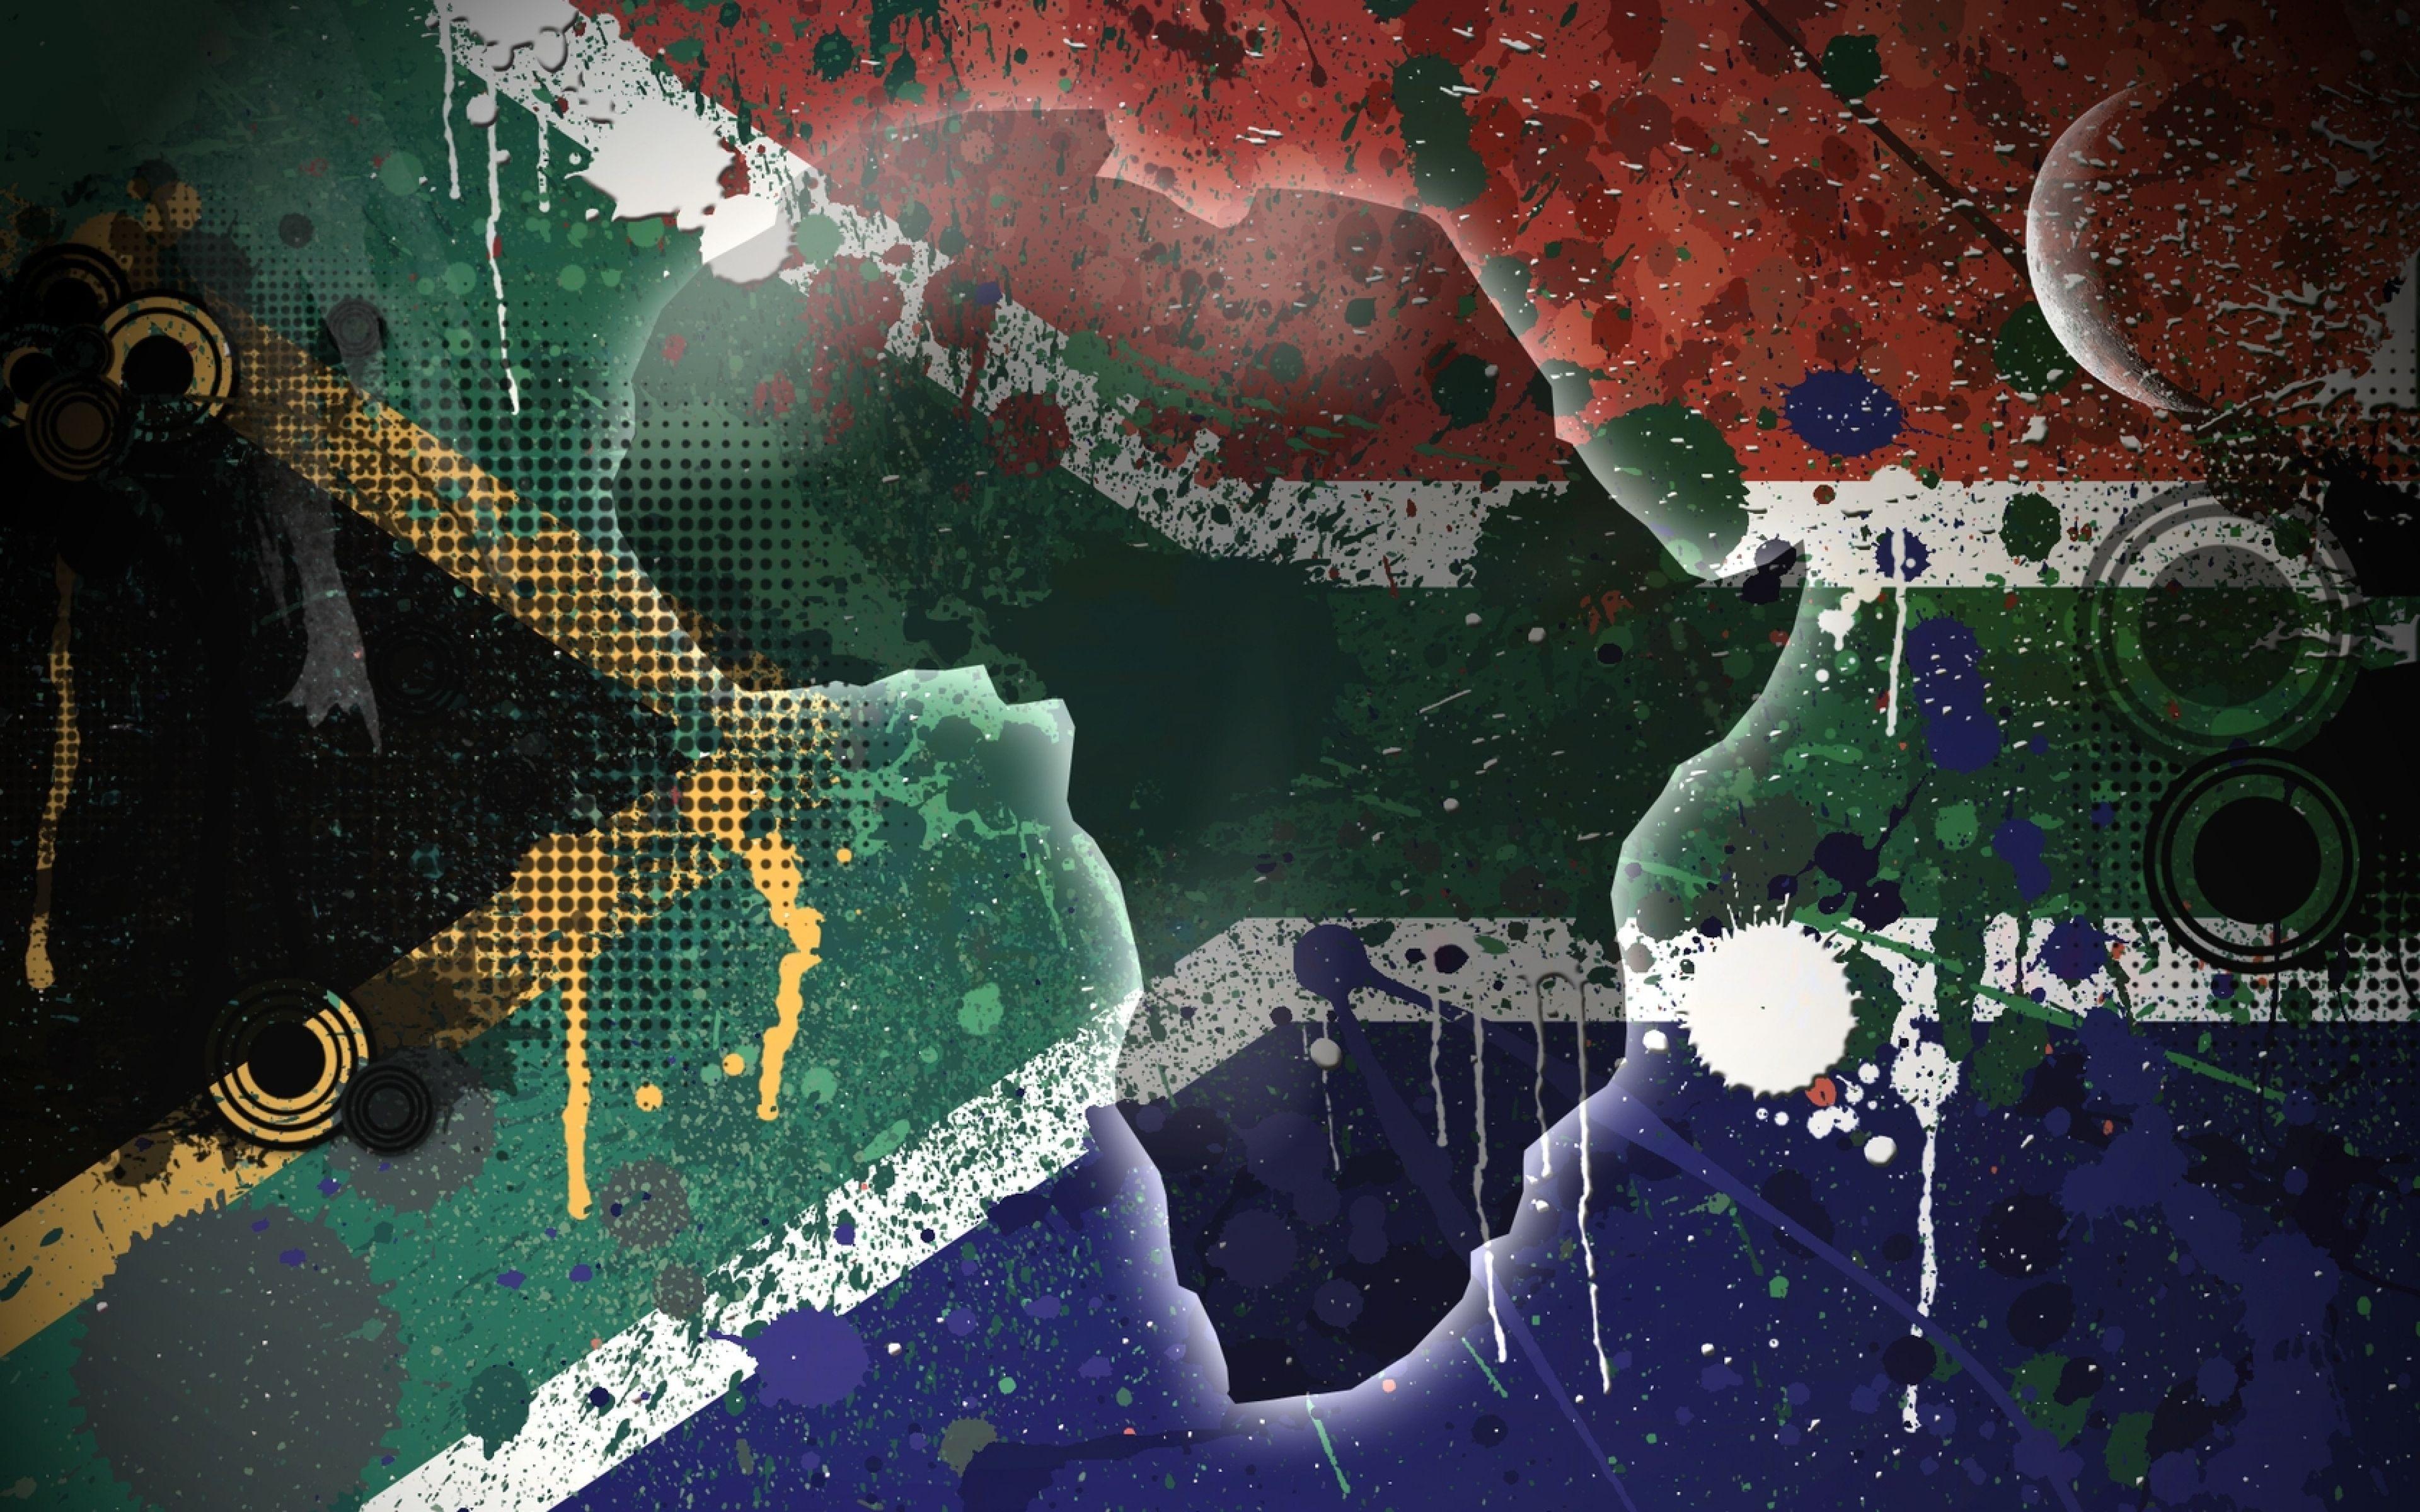 Download Wallpaper 3840x2400 Republic of south africa, South